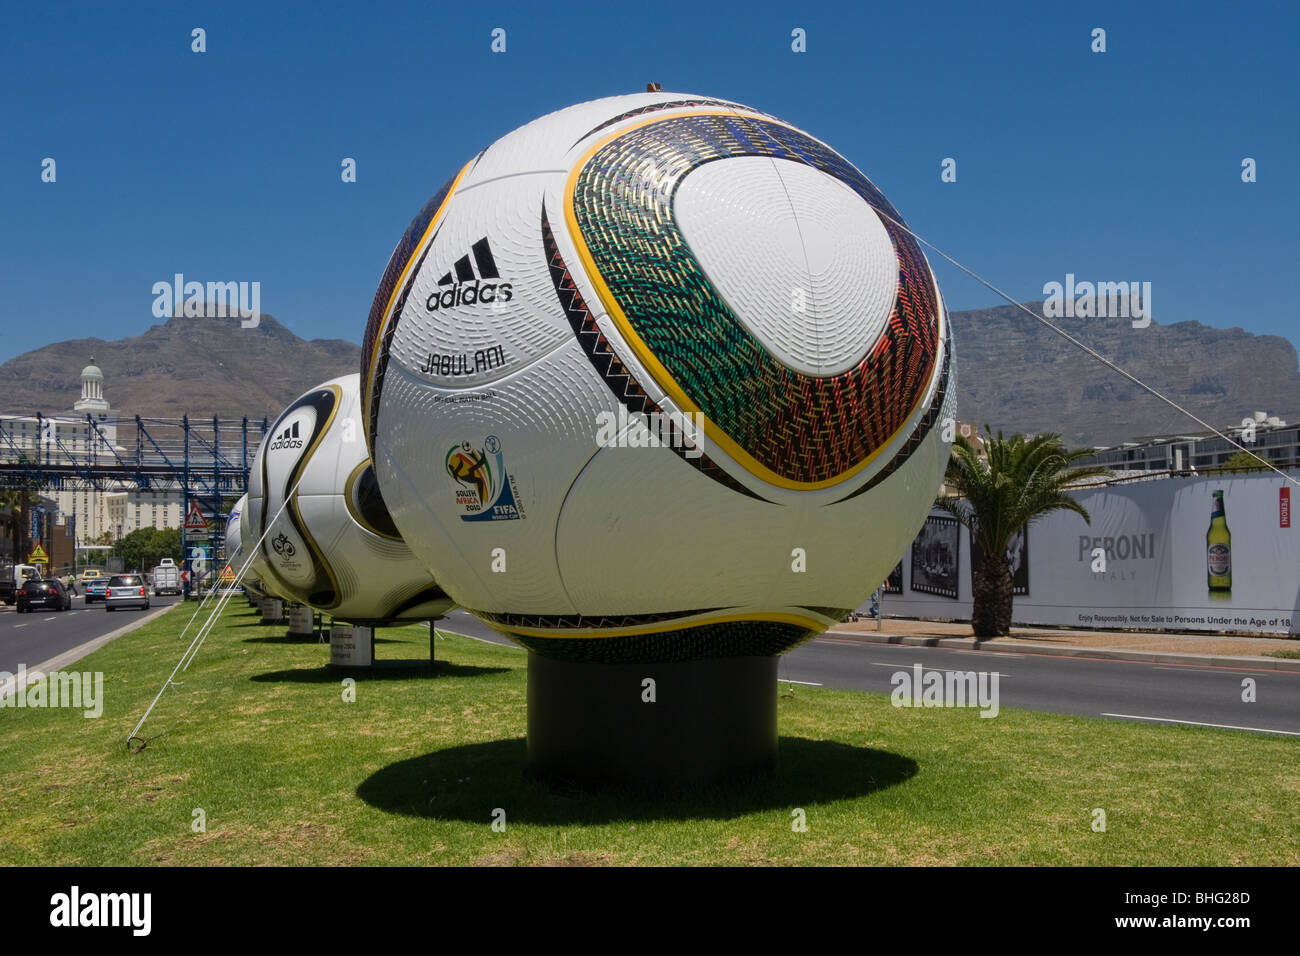 Display of the Jabulani and other previous FIFA World Cup match balls in Cape Town, South Africa Stock Photo